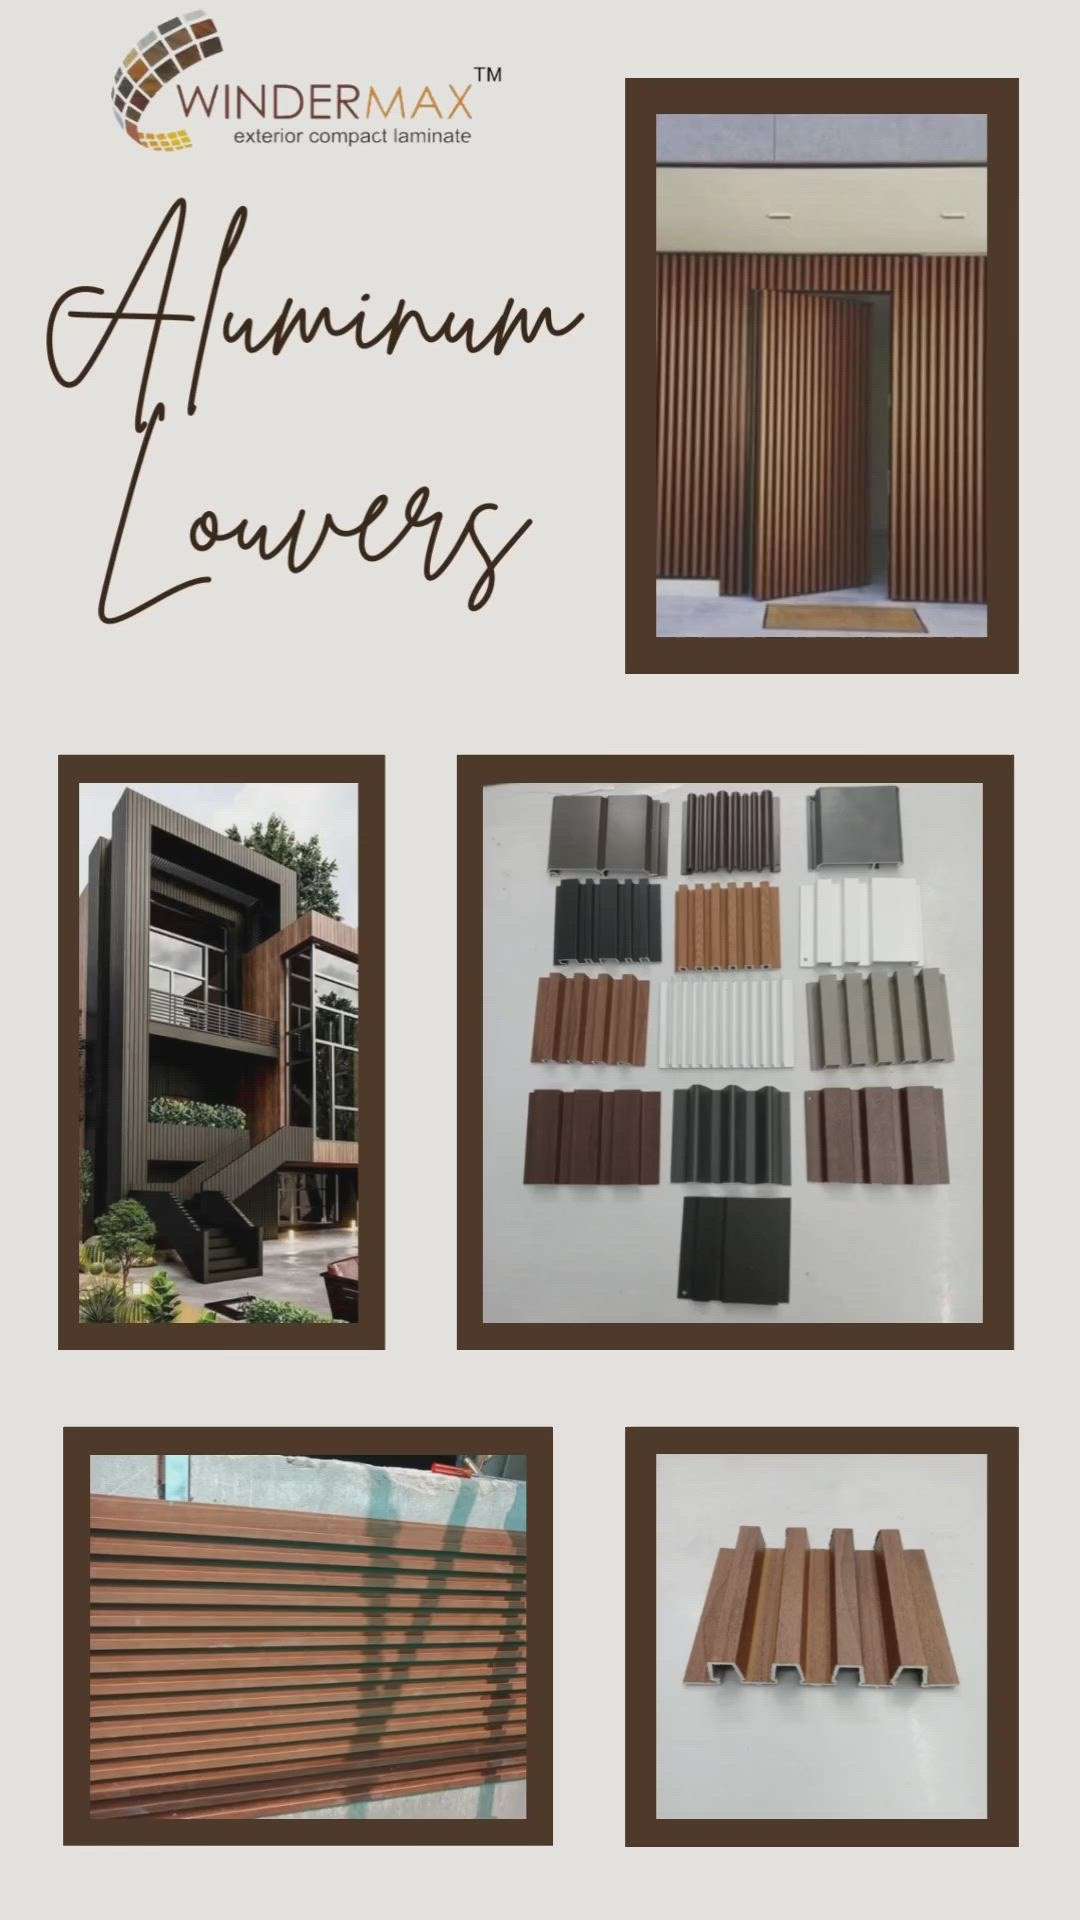 Windermax India Aluminium Louvers Design and sites
.
.
#elevation #architecture #design #interiordesign #construction #elevationdesign #architect #interior #exteriordesign #architecturedesign #civilengineering #autocad #interiordesigner #elevations #drawing #frontelevation #architecturelovers #home #facade #revit #homedecor #wpclouvers #aluminiumlouvers #shed #mssteel #hpl #louvers #aluminiumfin

.
For more details our all products please visit websites
www.windermaxindia.com
www.indianmake.co.in 
Info@windermaxindia.com
or call us on 
8882291670 9810980278
Regards
Windermax India